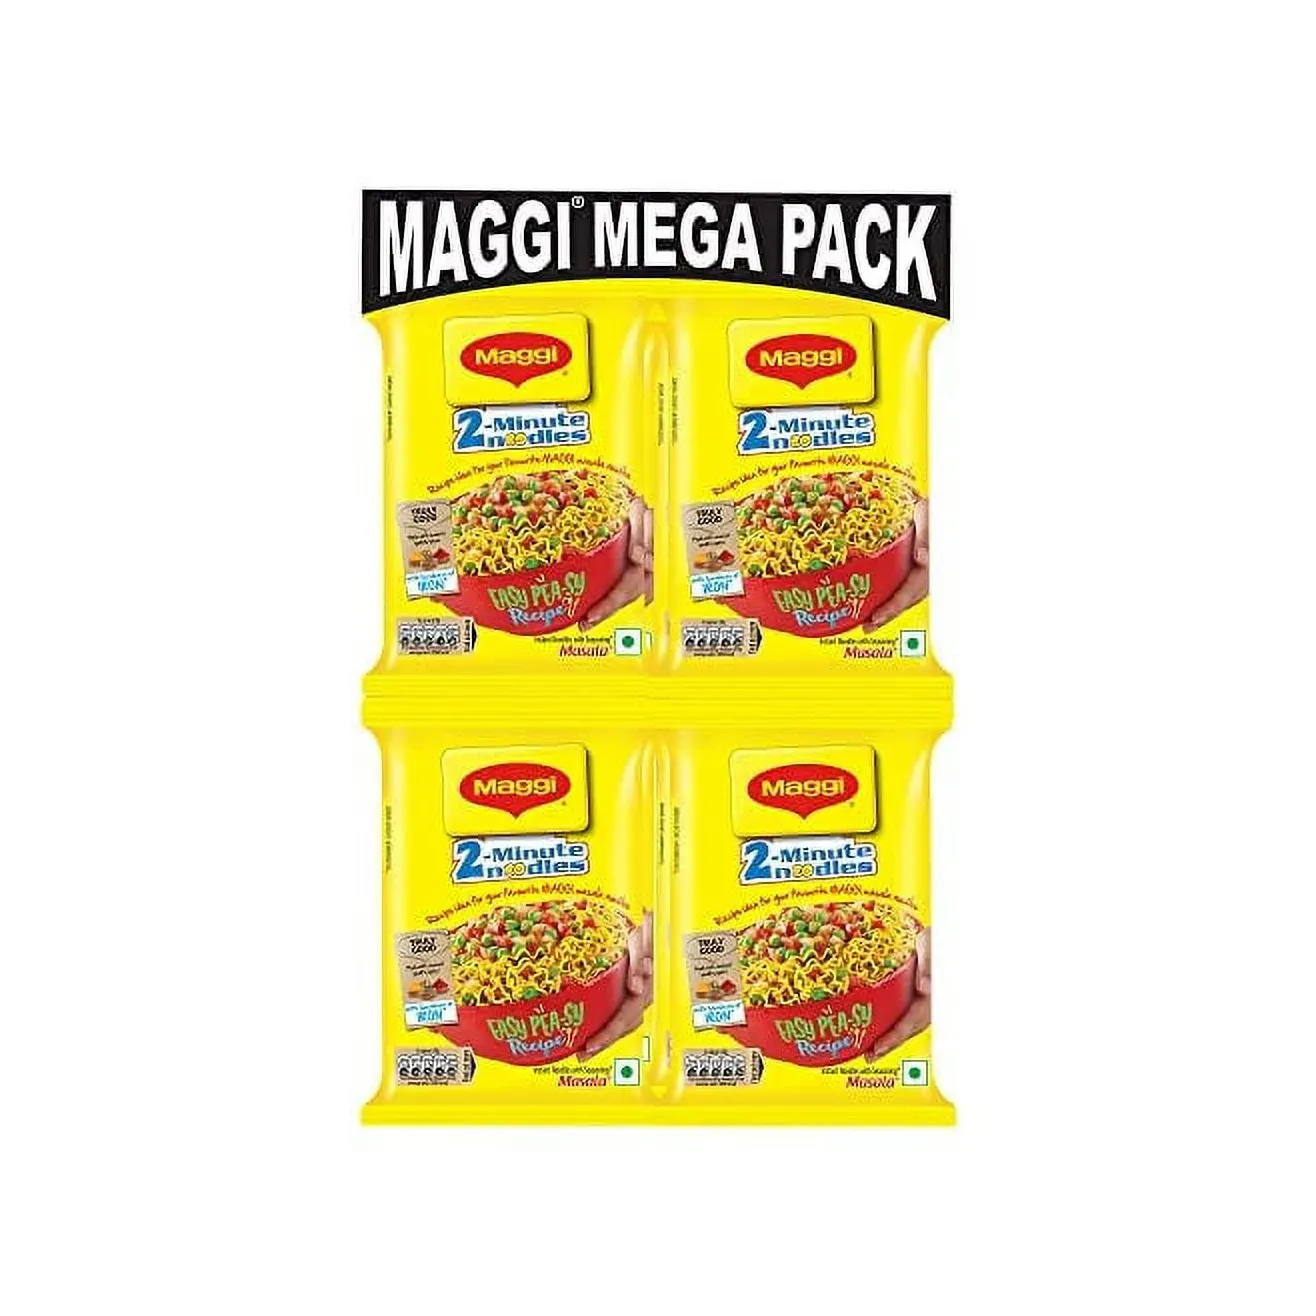 INSTANT NOODLES MAG-GI 2 MINUTE ASAM LAKSA 2-MINN [12 x 5 x 80g] FAST EASY HOME COOKED MEAL HALAL WHOLESALER